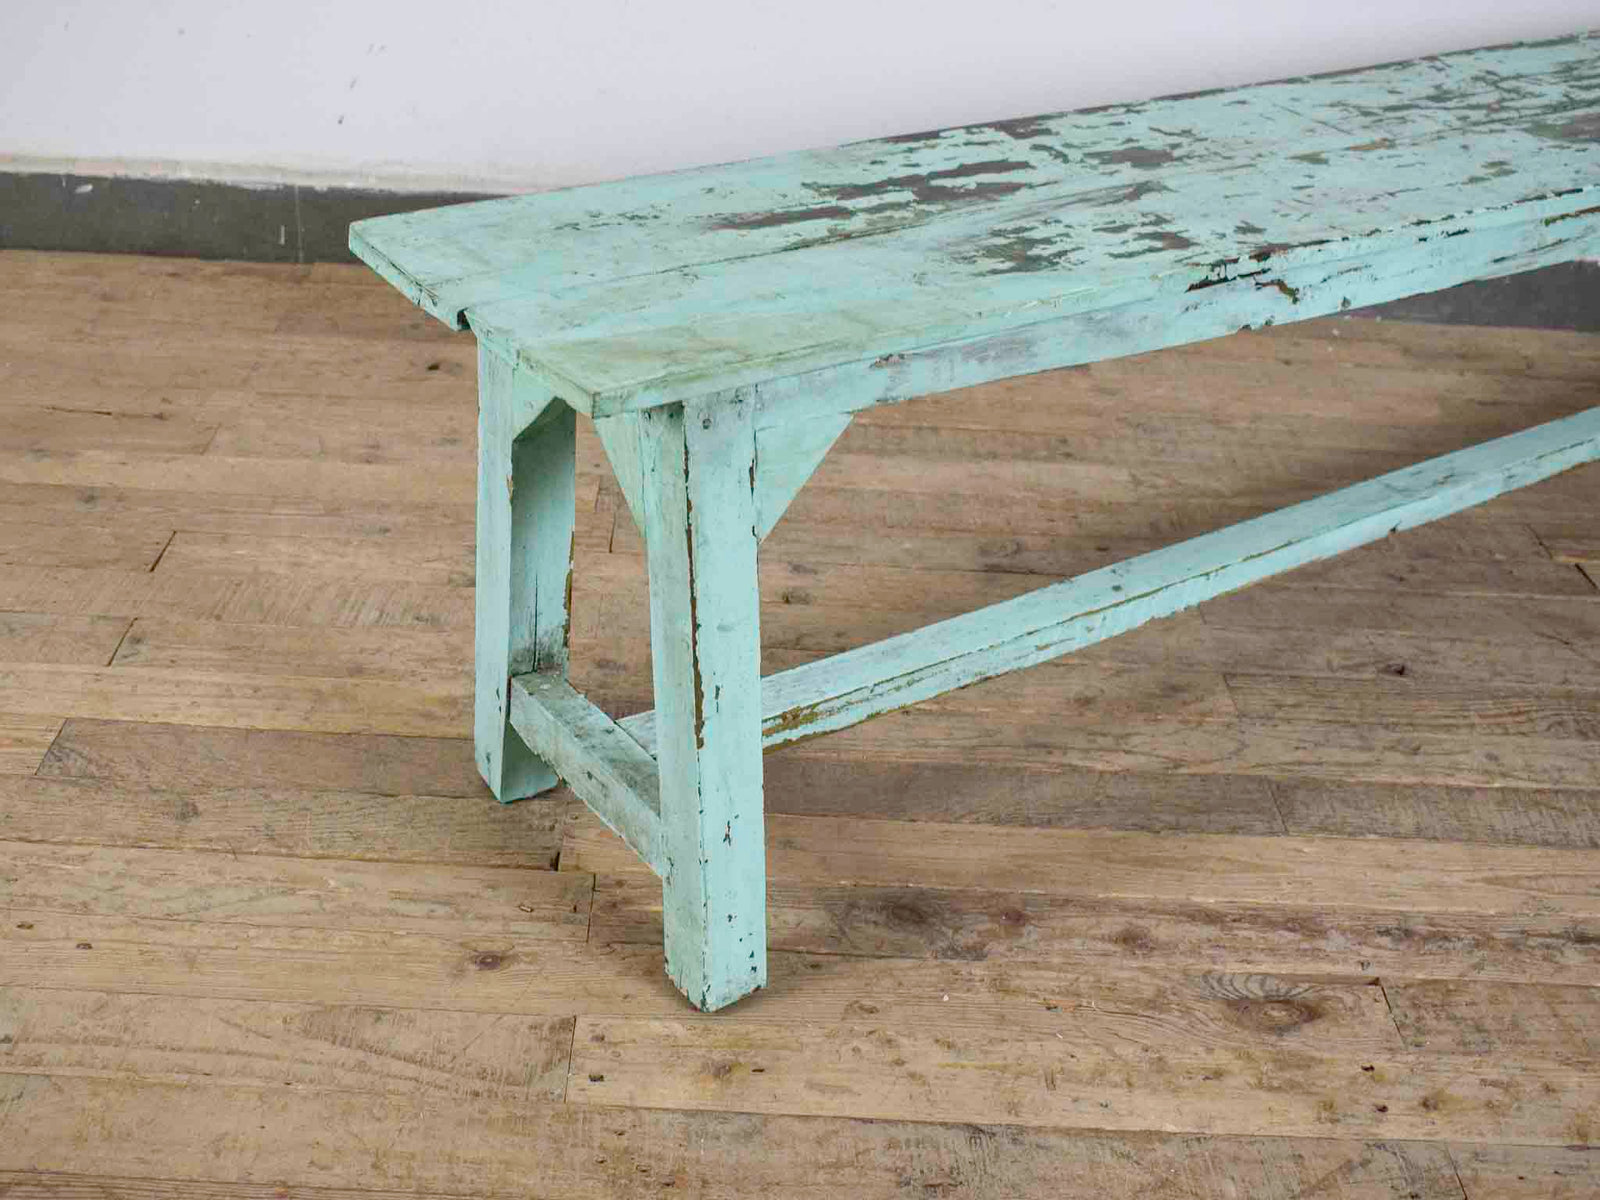 MILL-1690/14 Wooden Bench C30